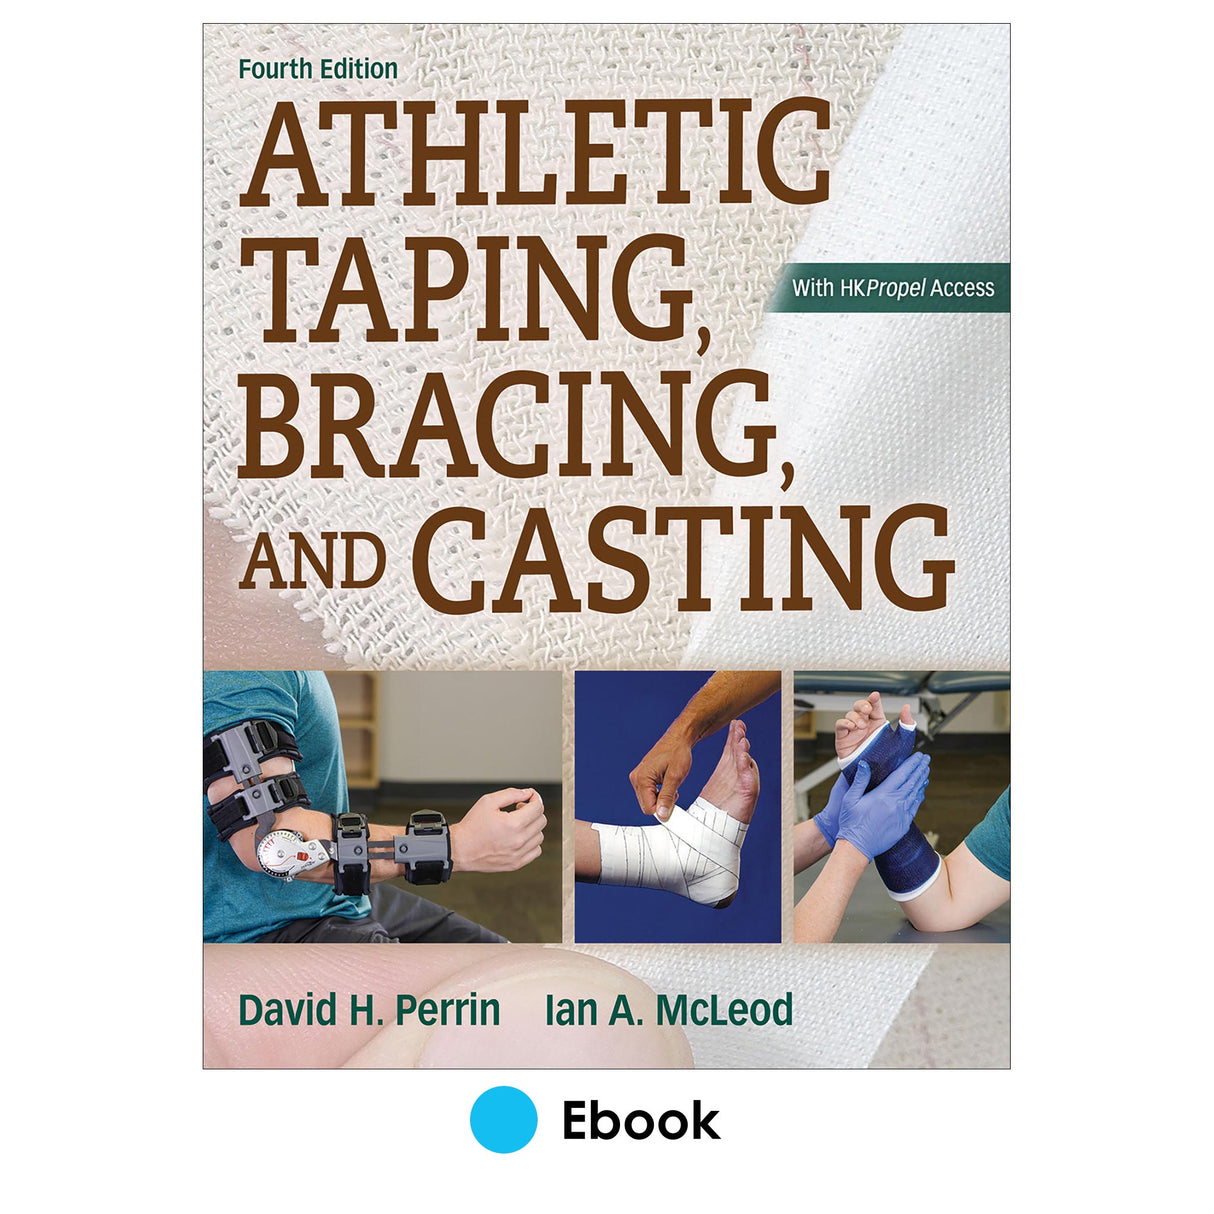 Athletic Taping, Bracing, and Casting 4th Edition Ebook With HKPropel Access